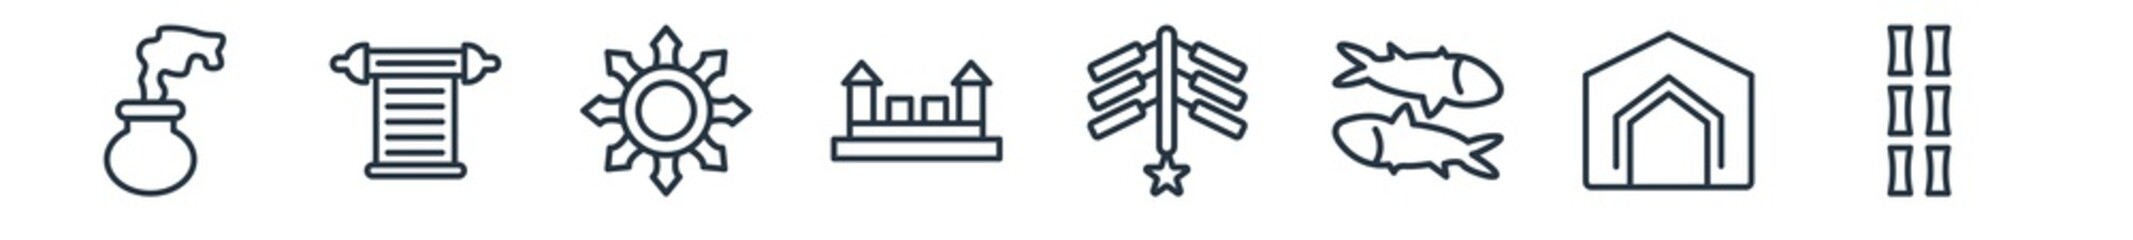 linear set of asian outline icons. line vector icons such as smoke bomb, scrolls, shuriken, great wall of china, firecrackers, bamboo vector illustration.